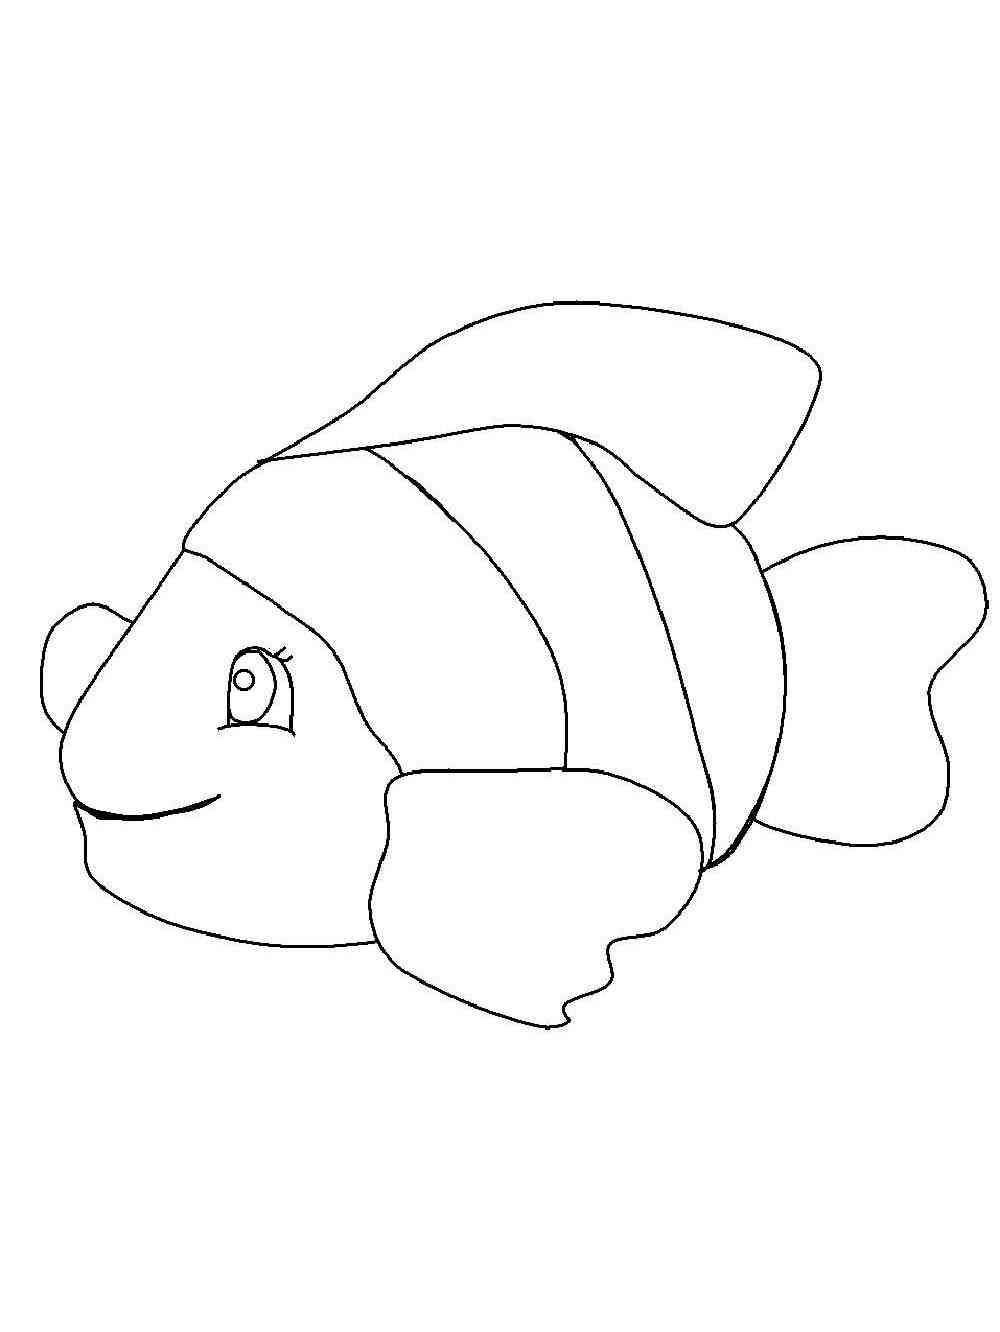 Clownfish 13 coloring page